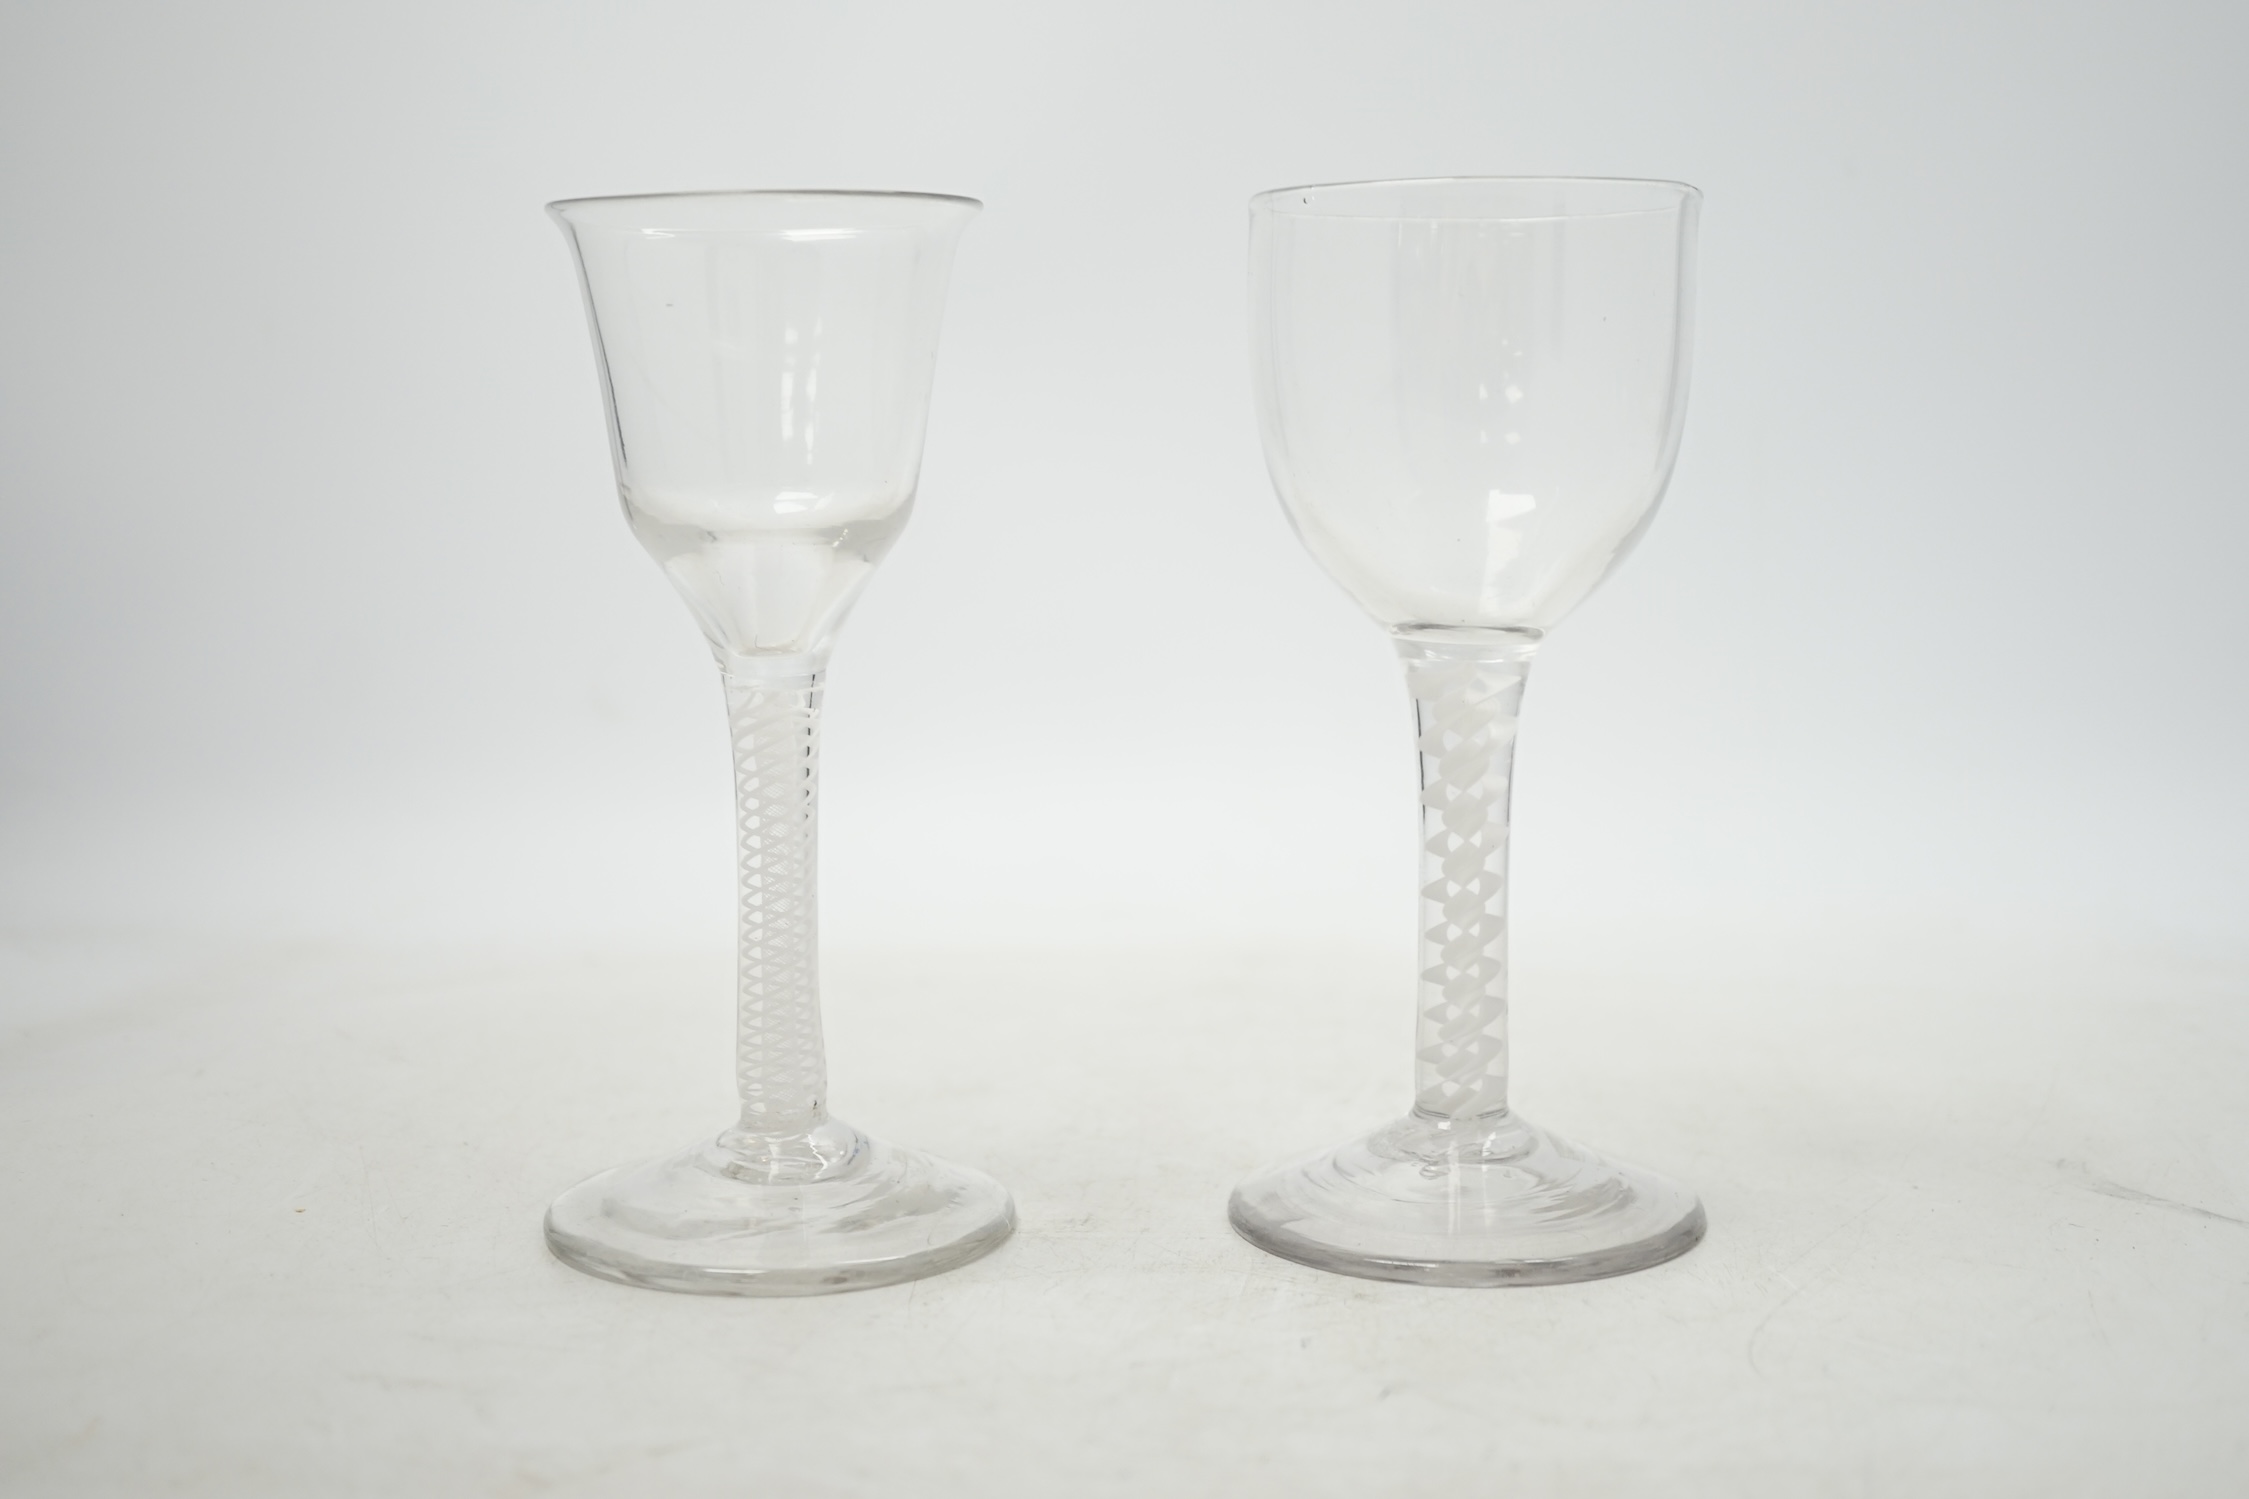 Two mid-18th century opaque twist cordial glasses, 15cm. Condition - good